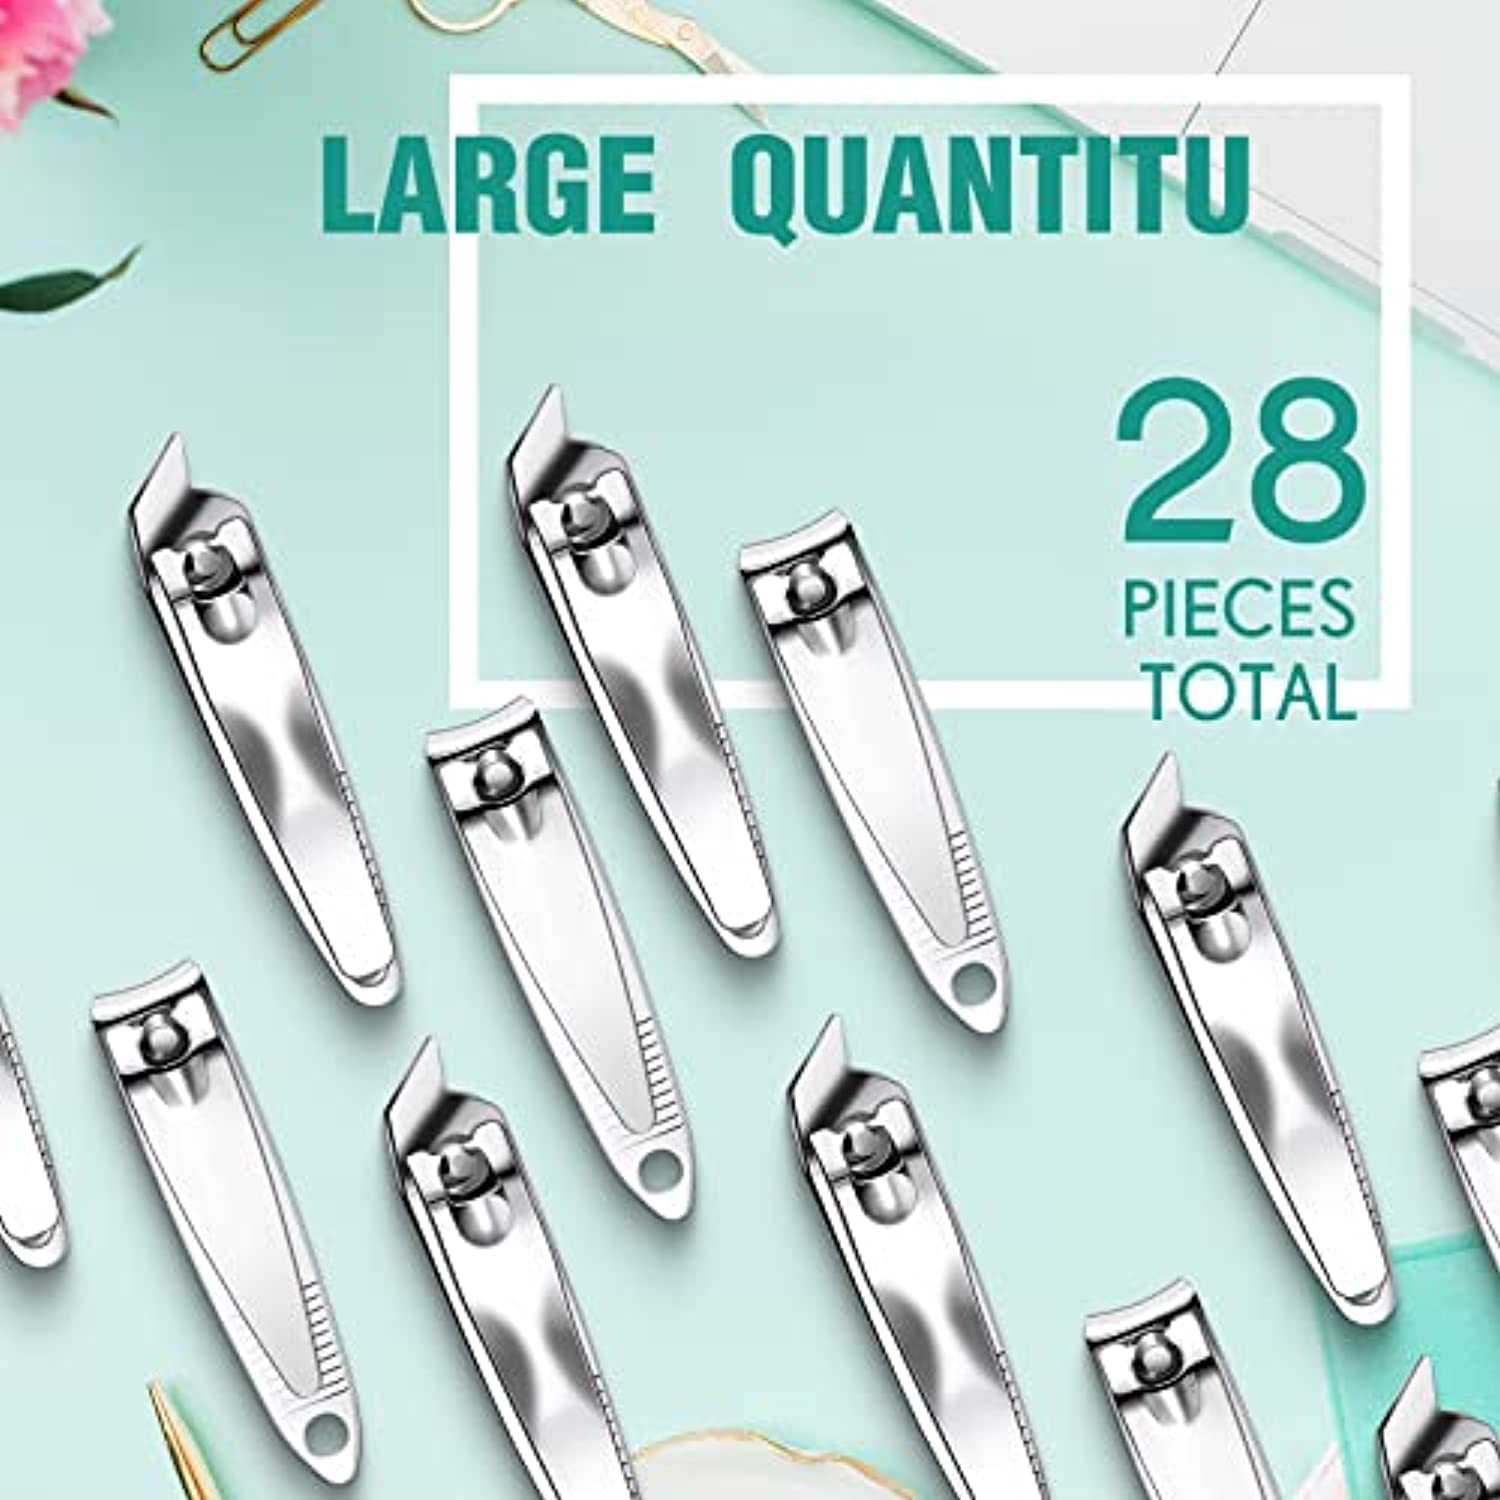 28 Pcs Nail Clippers Stainless Steel Fingernail and Toenail Clipper Slanted Pointed Nail Cutter Straight Edge Nail Clipper Pointed Sturdy Trimmer Set for Men and Women, 2 Designs